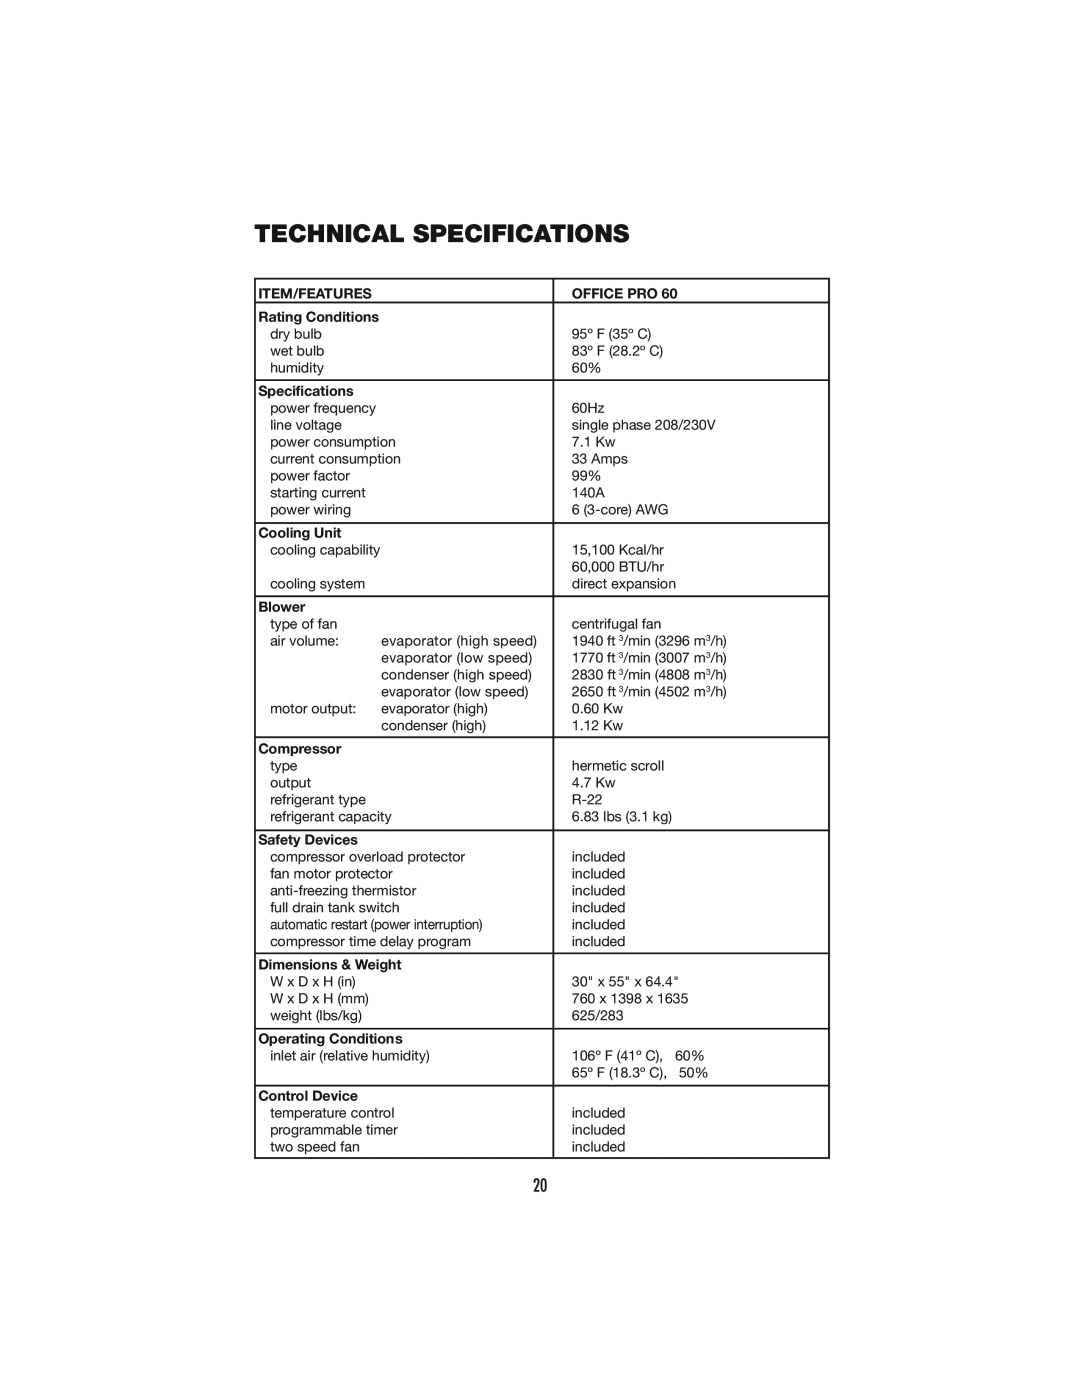 Denso PRO 60 operation manual Technical Specifications 